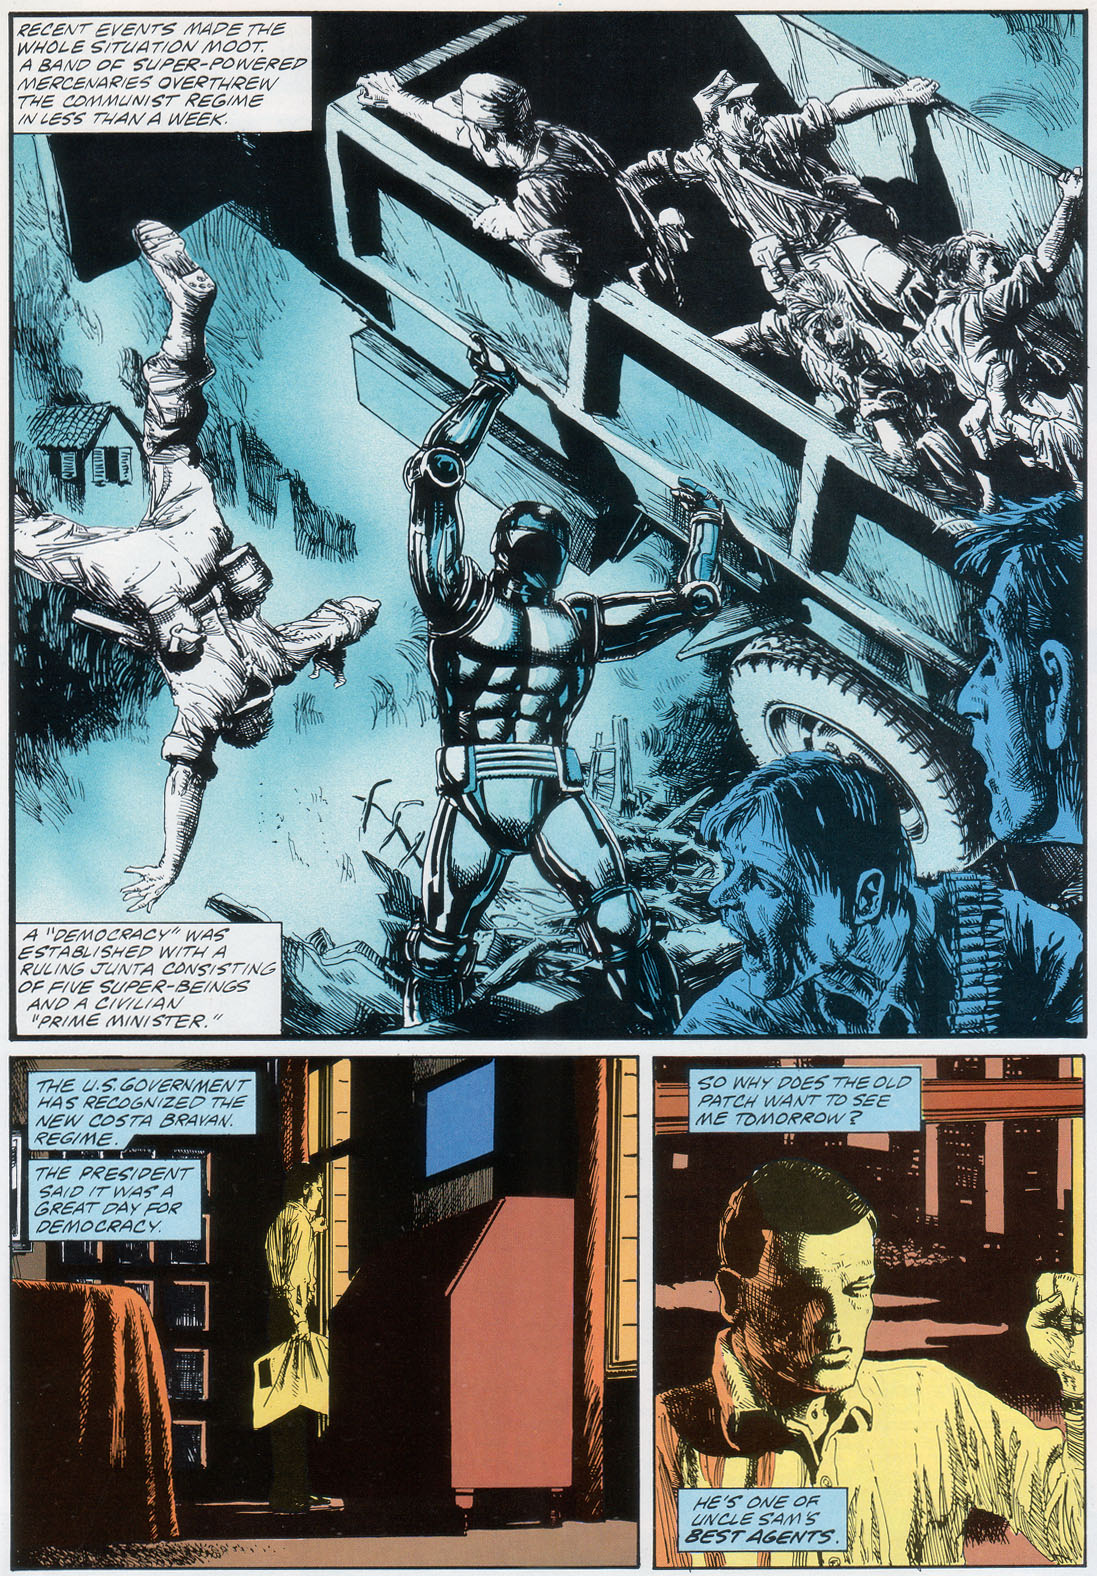 Marvel Graphic Novel issue 57 - Rick Mason - The Agent - Page 22